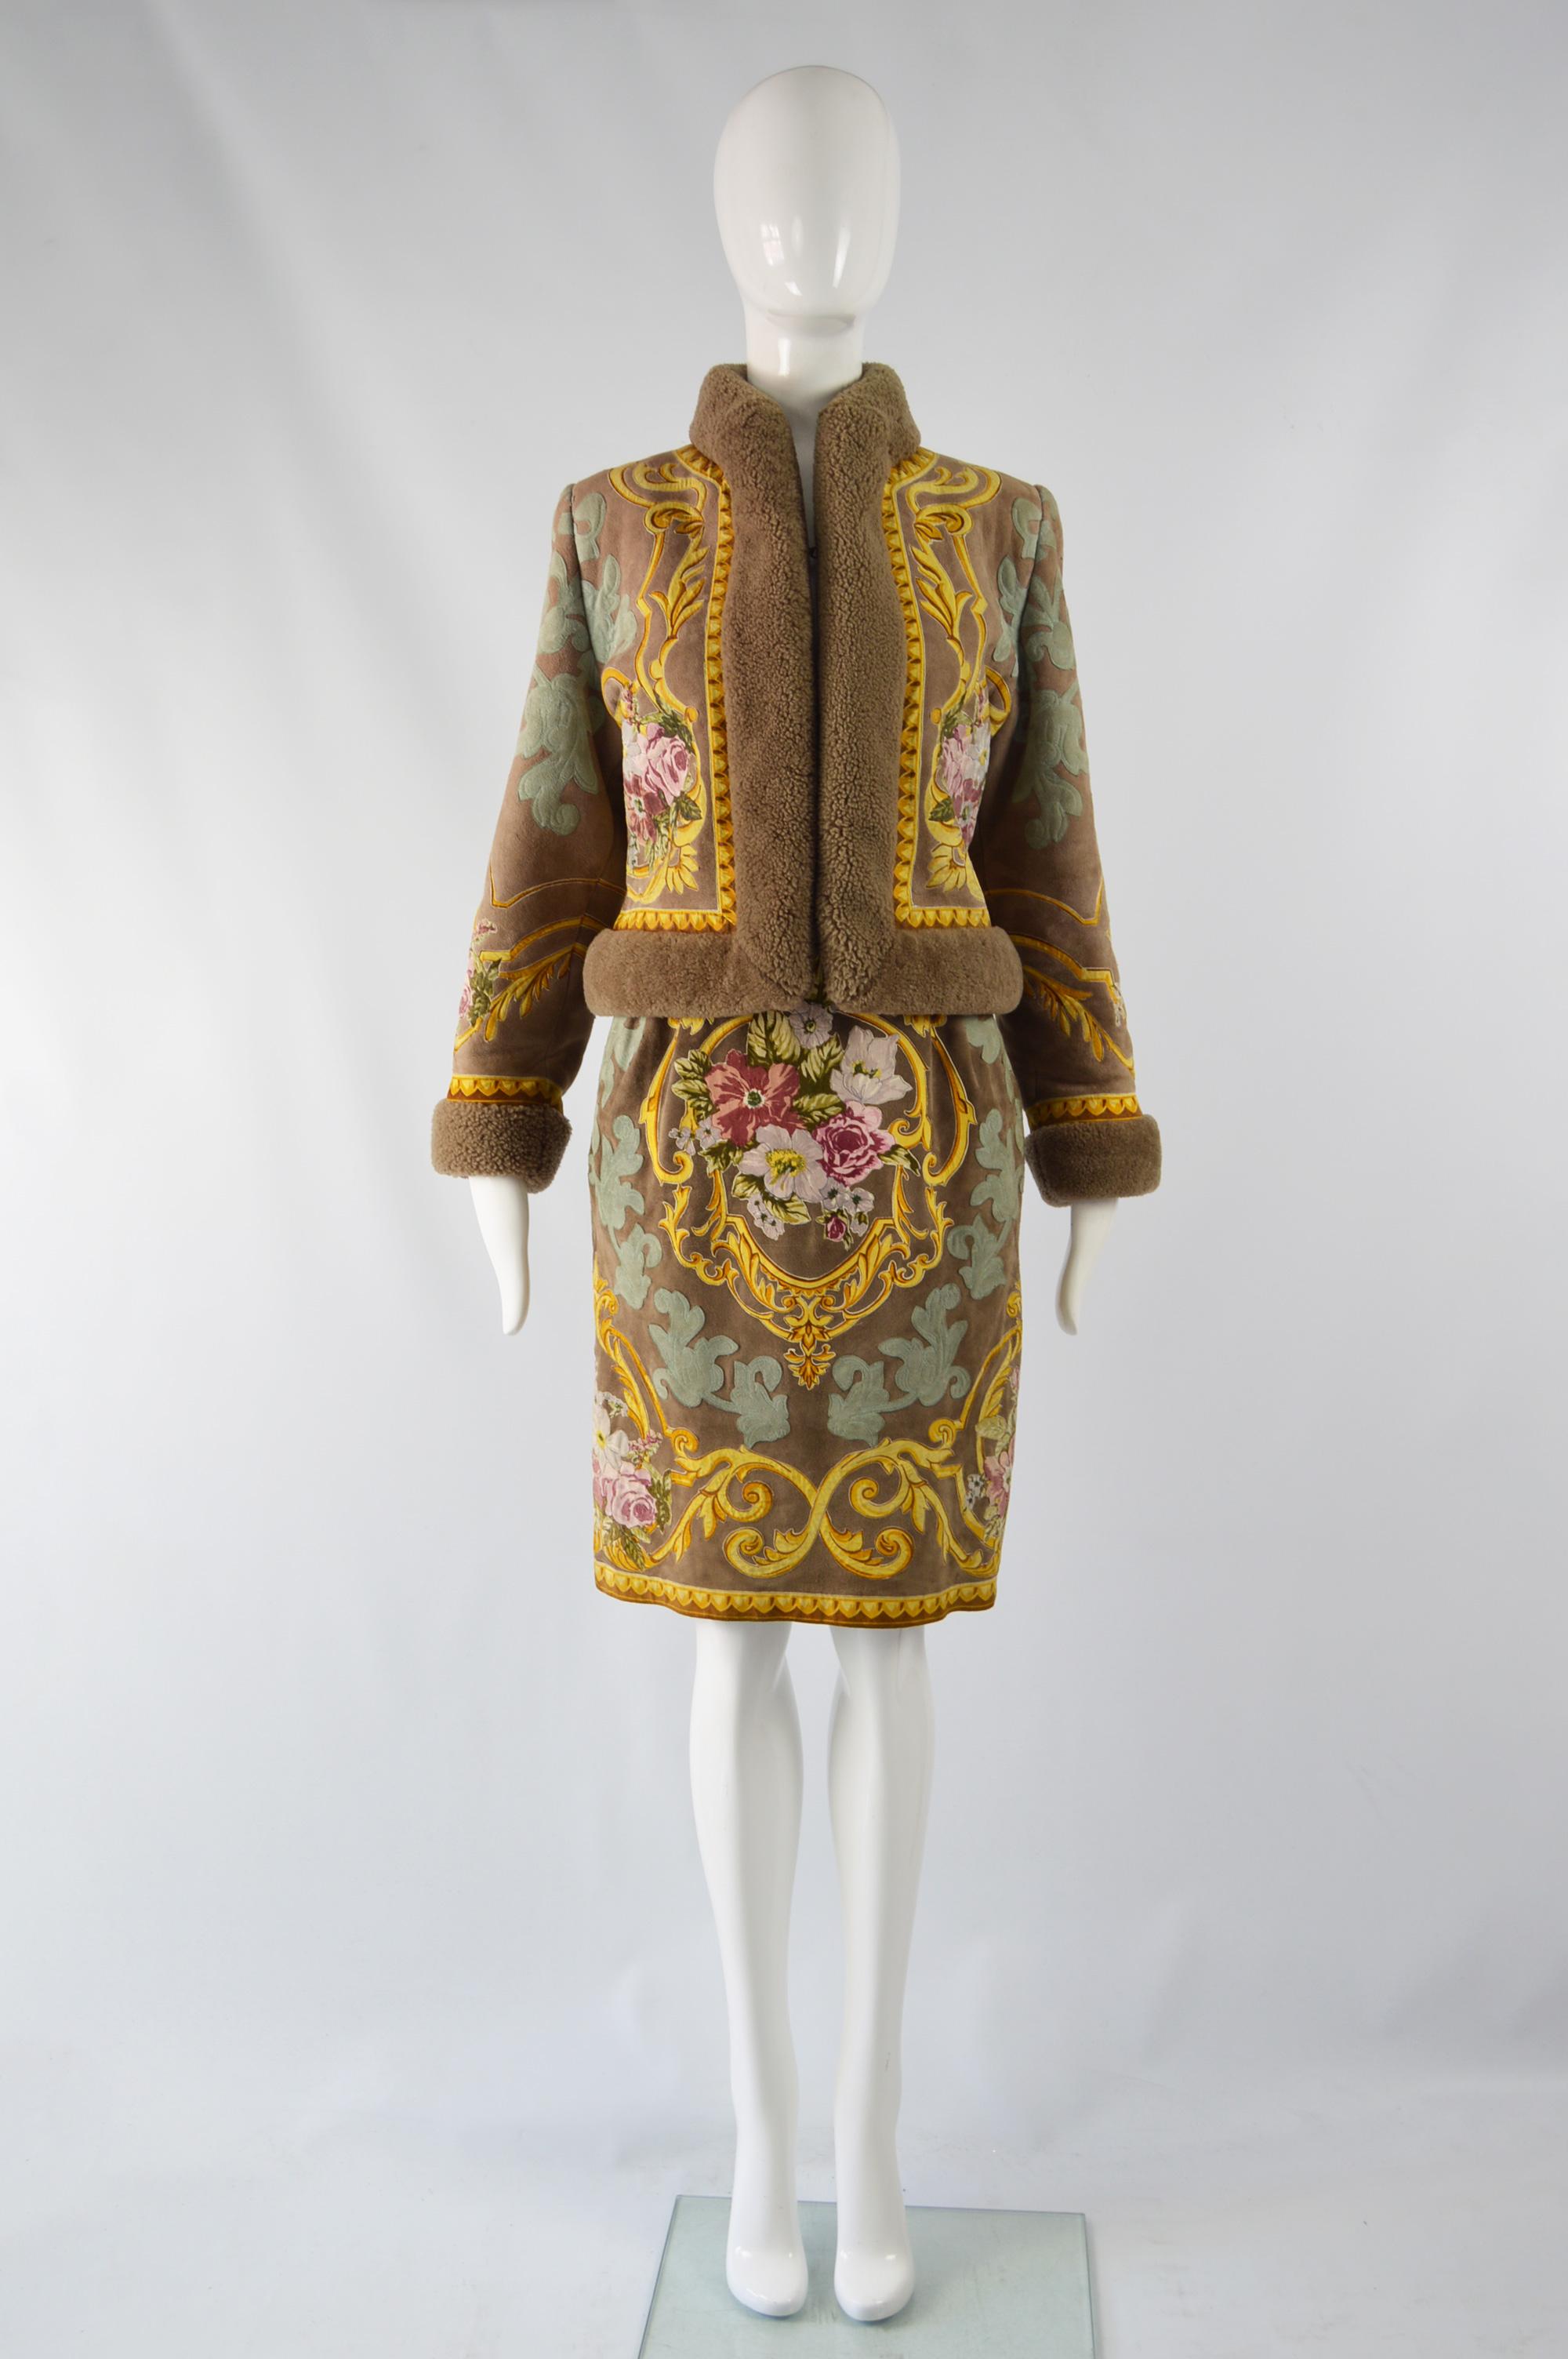 An incredibly Rare and luxurious, museum worthy 2 piece skirt suit by legendary fashion designer, Valentino. In a brown sheepskin with beautiful leather appliques creating a baroque floral print with a warm shearling lining. The fitted silhouette of